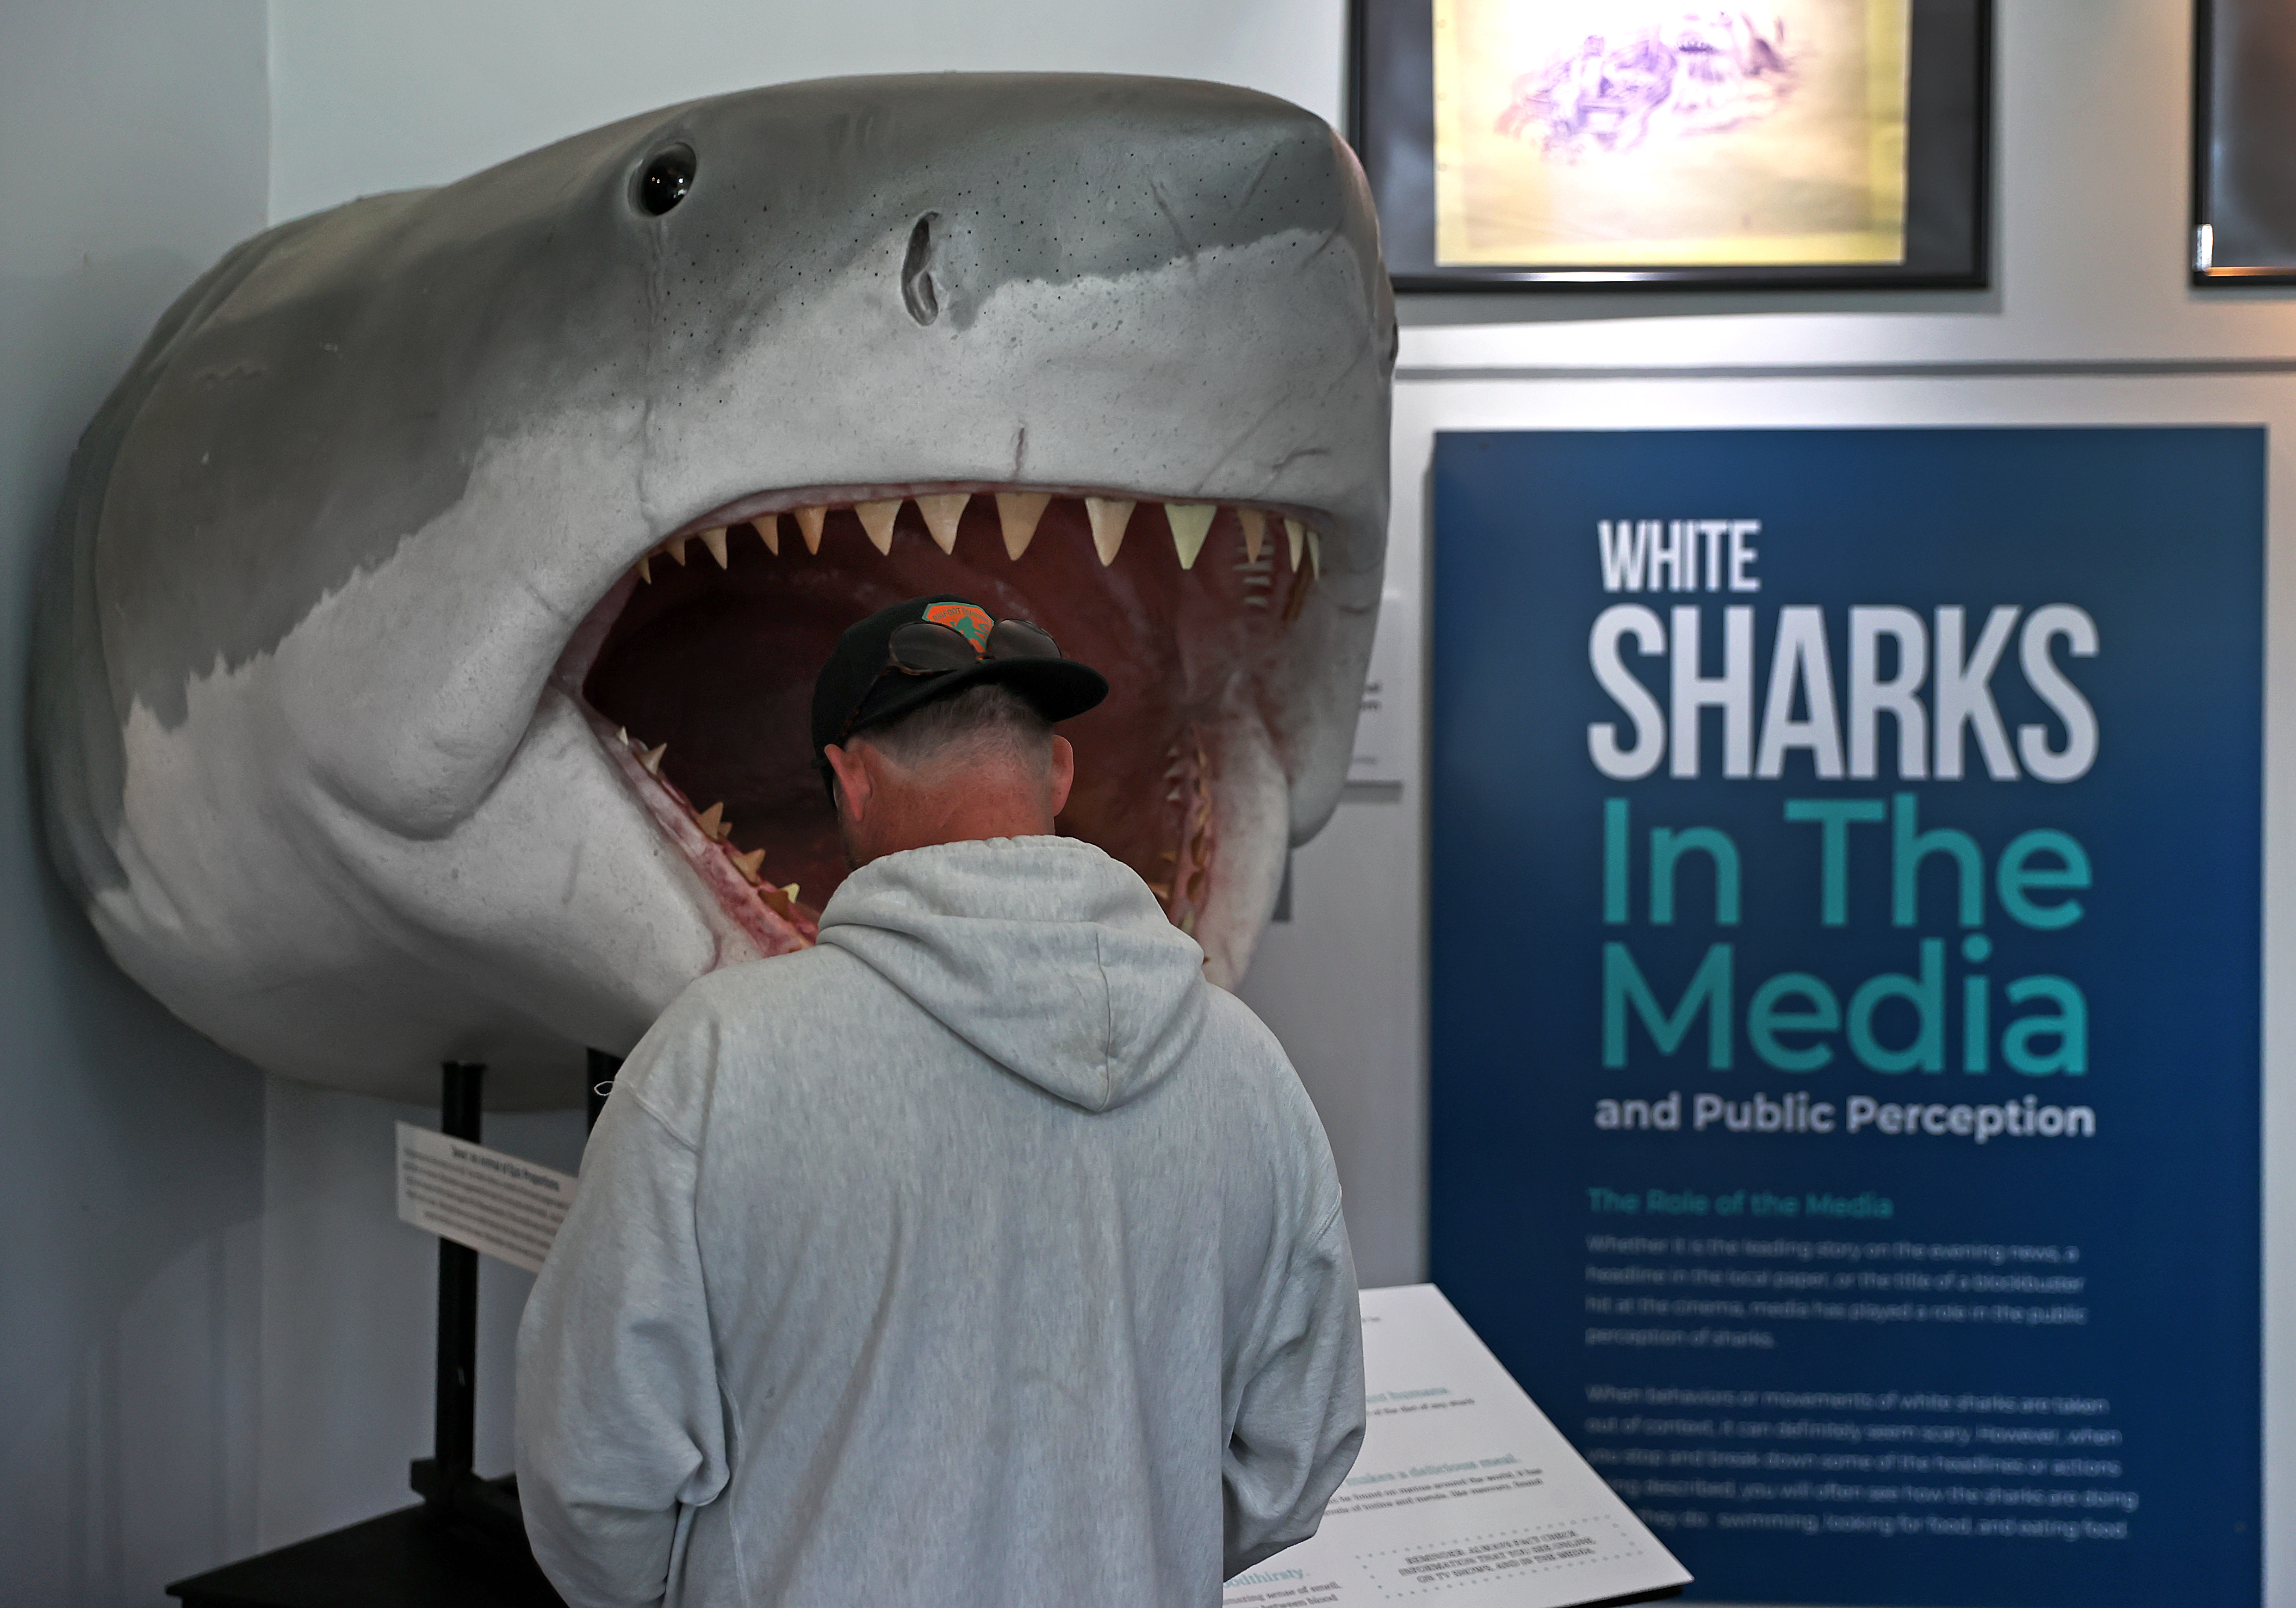 The truth about 'fair competition' and other insights from Shark